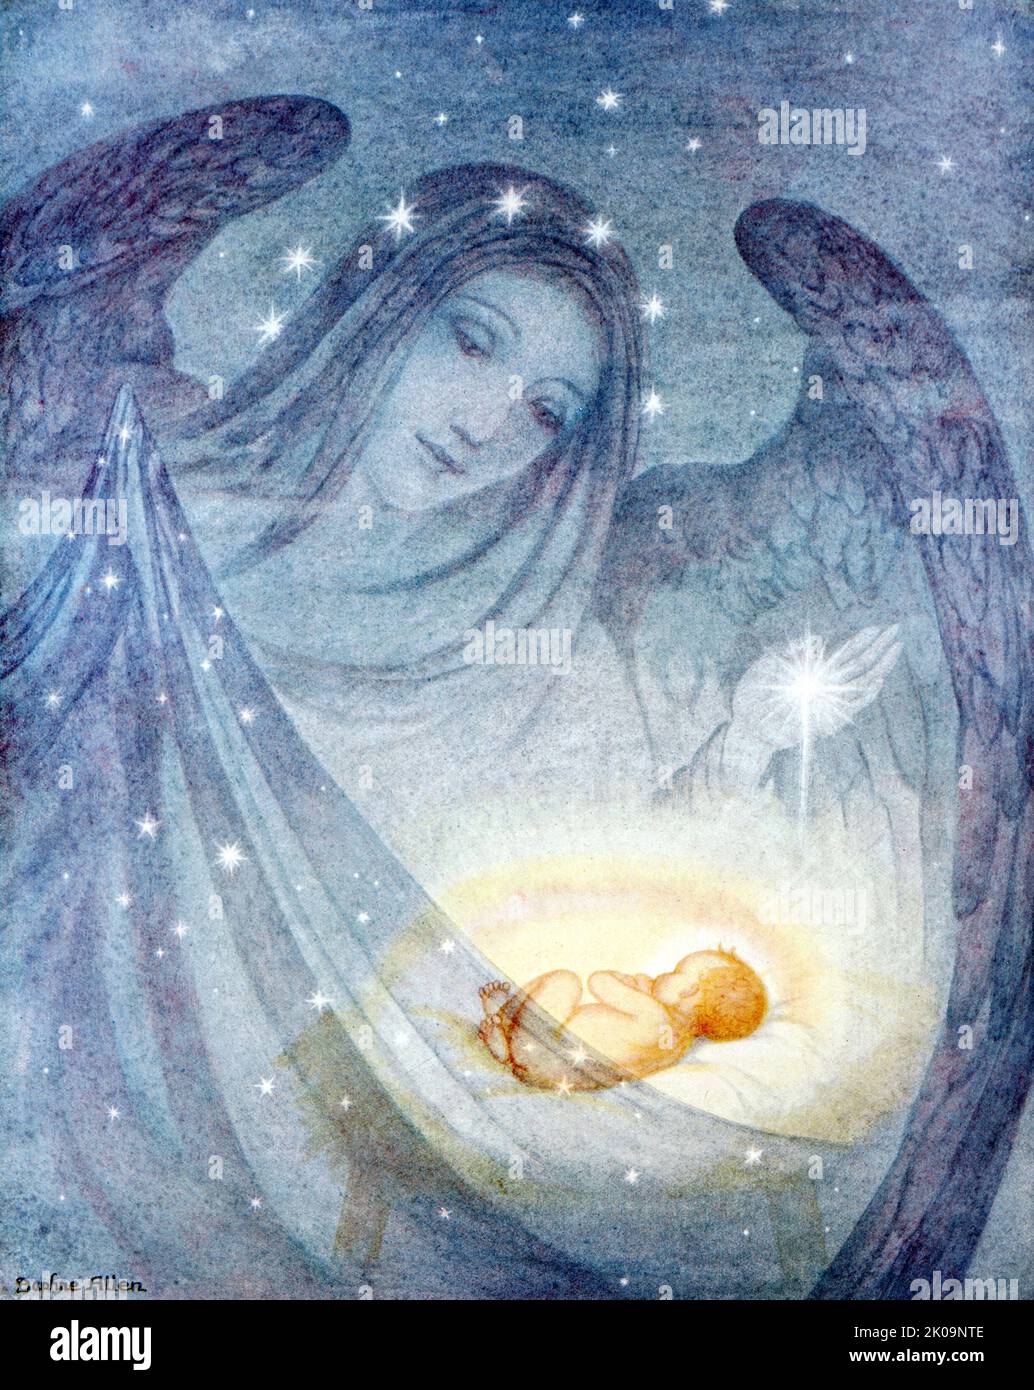 The Spirit of Christmas Night keeps watch over the Holy Child. Reproduced from a water colour by Daphne Allen. Daphne Constance Allen (6 January 1899 - 1985) was an English artist who achieved recognition at an early age as a painter and illustrator. Throughout her career she painted religious subjects and landscapes. Stock Photo